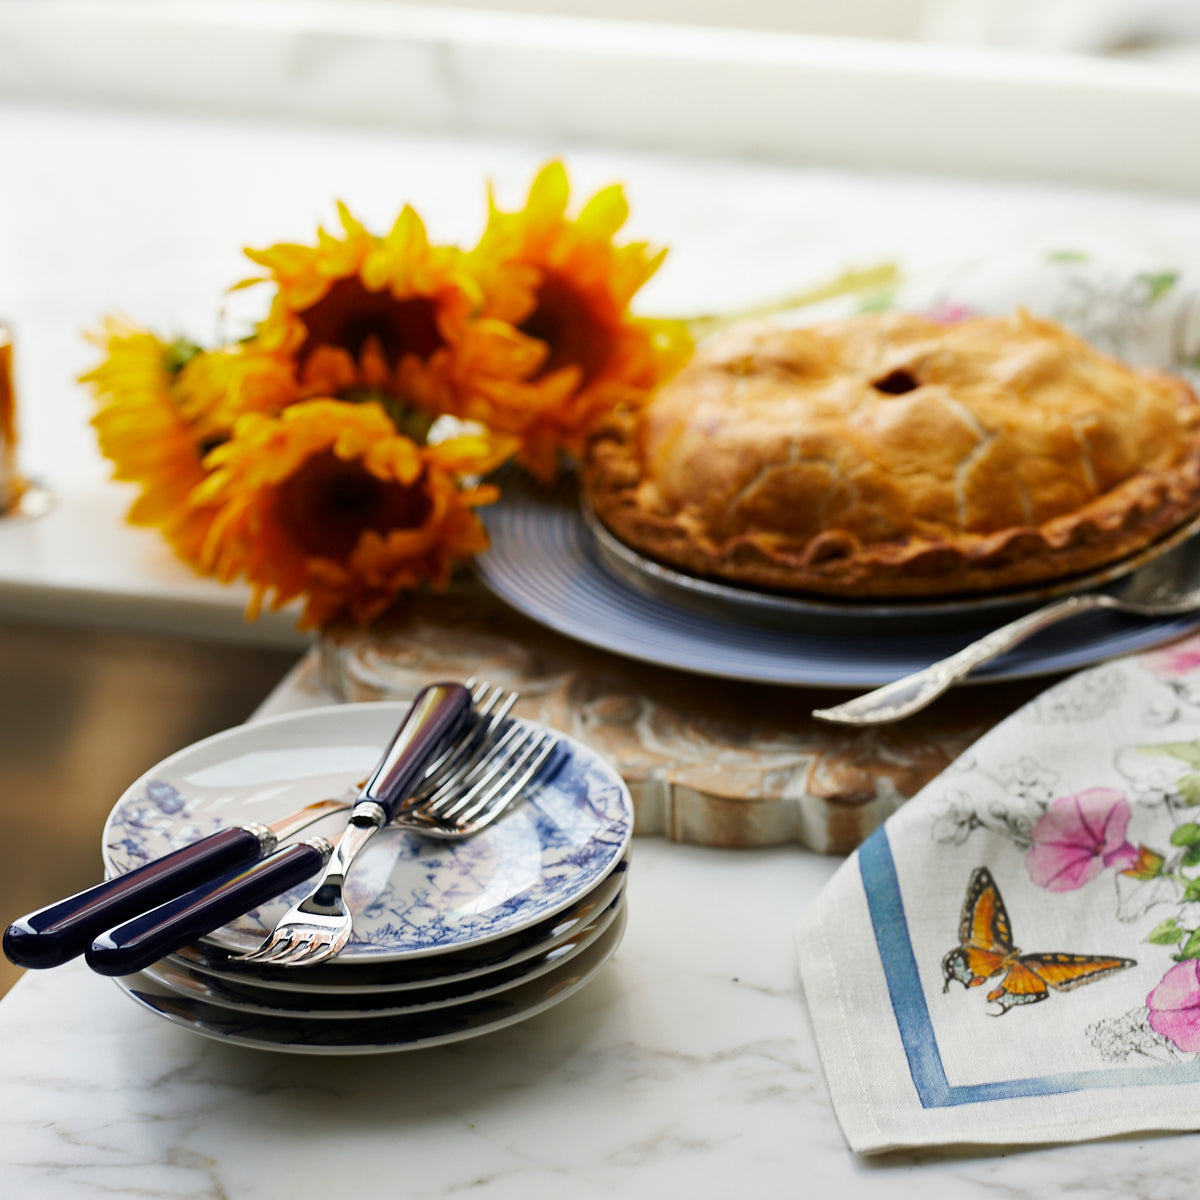 A freshly baked pie on a blue plate, accompanied by sunflowers, a folded napkin with a butterfly design, and a stack of Caskata Summer Blues Small Plates with utensils on a marble counter.